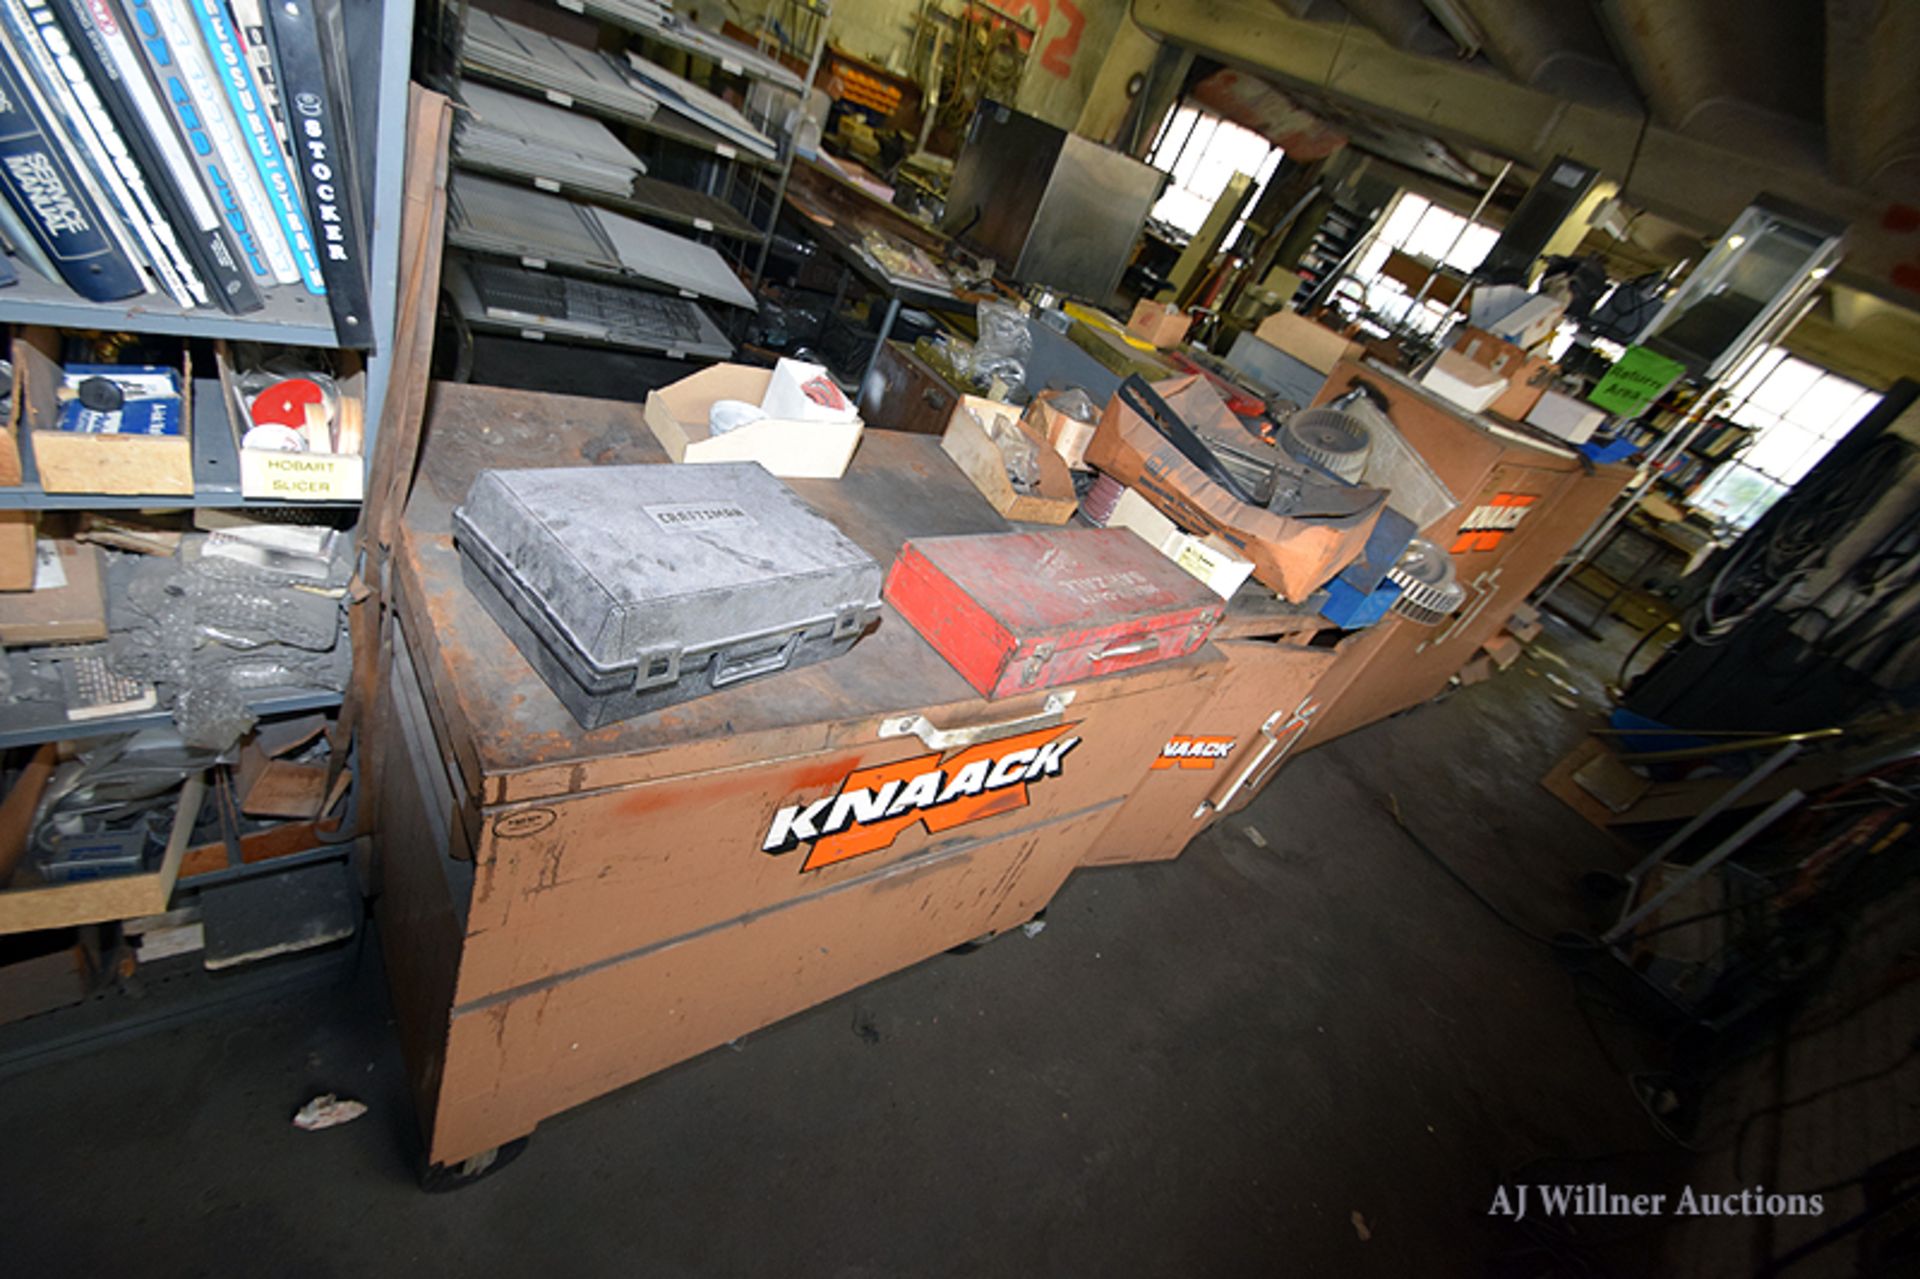 Contents of Workshop; Tools, Vacuums, Parts, Etc. - Image 6 of 13